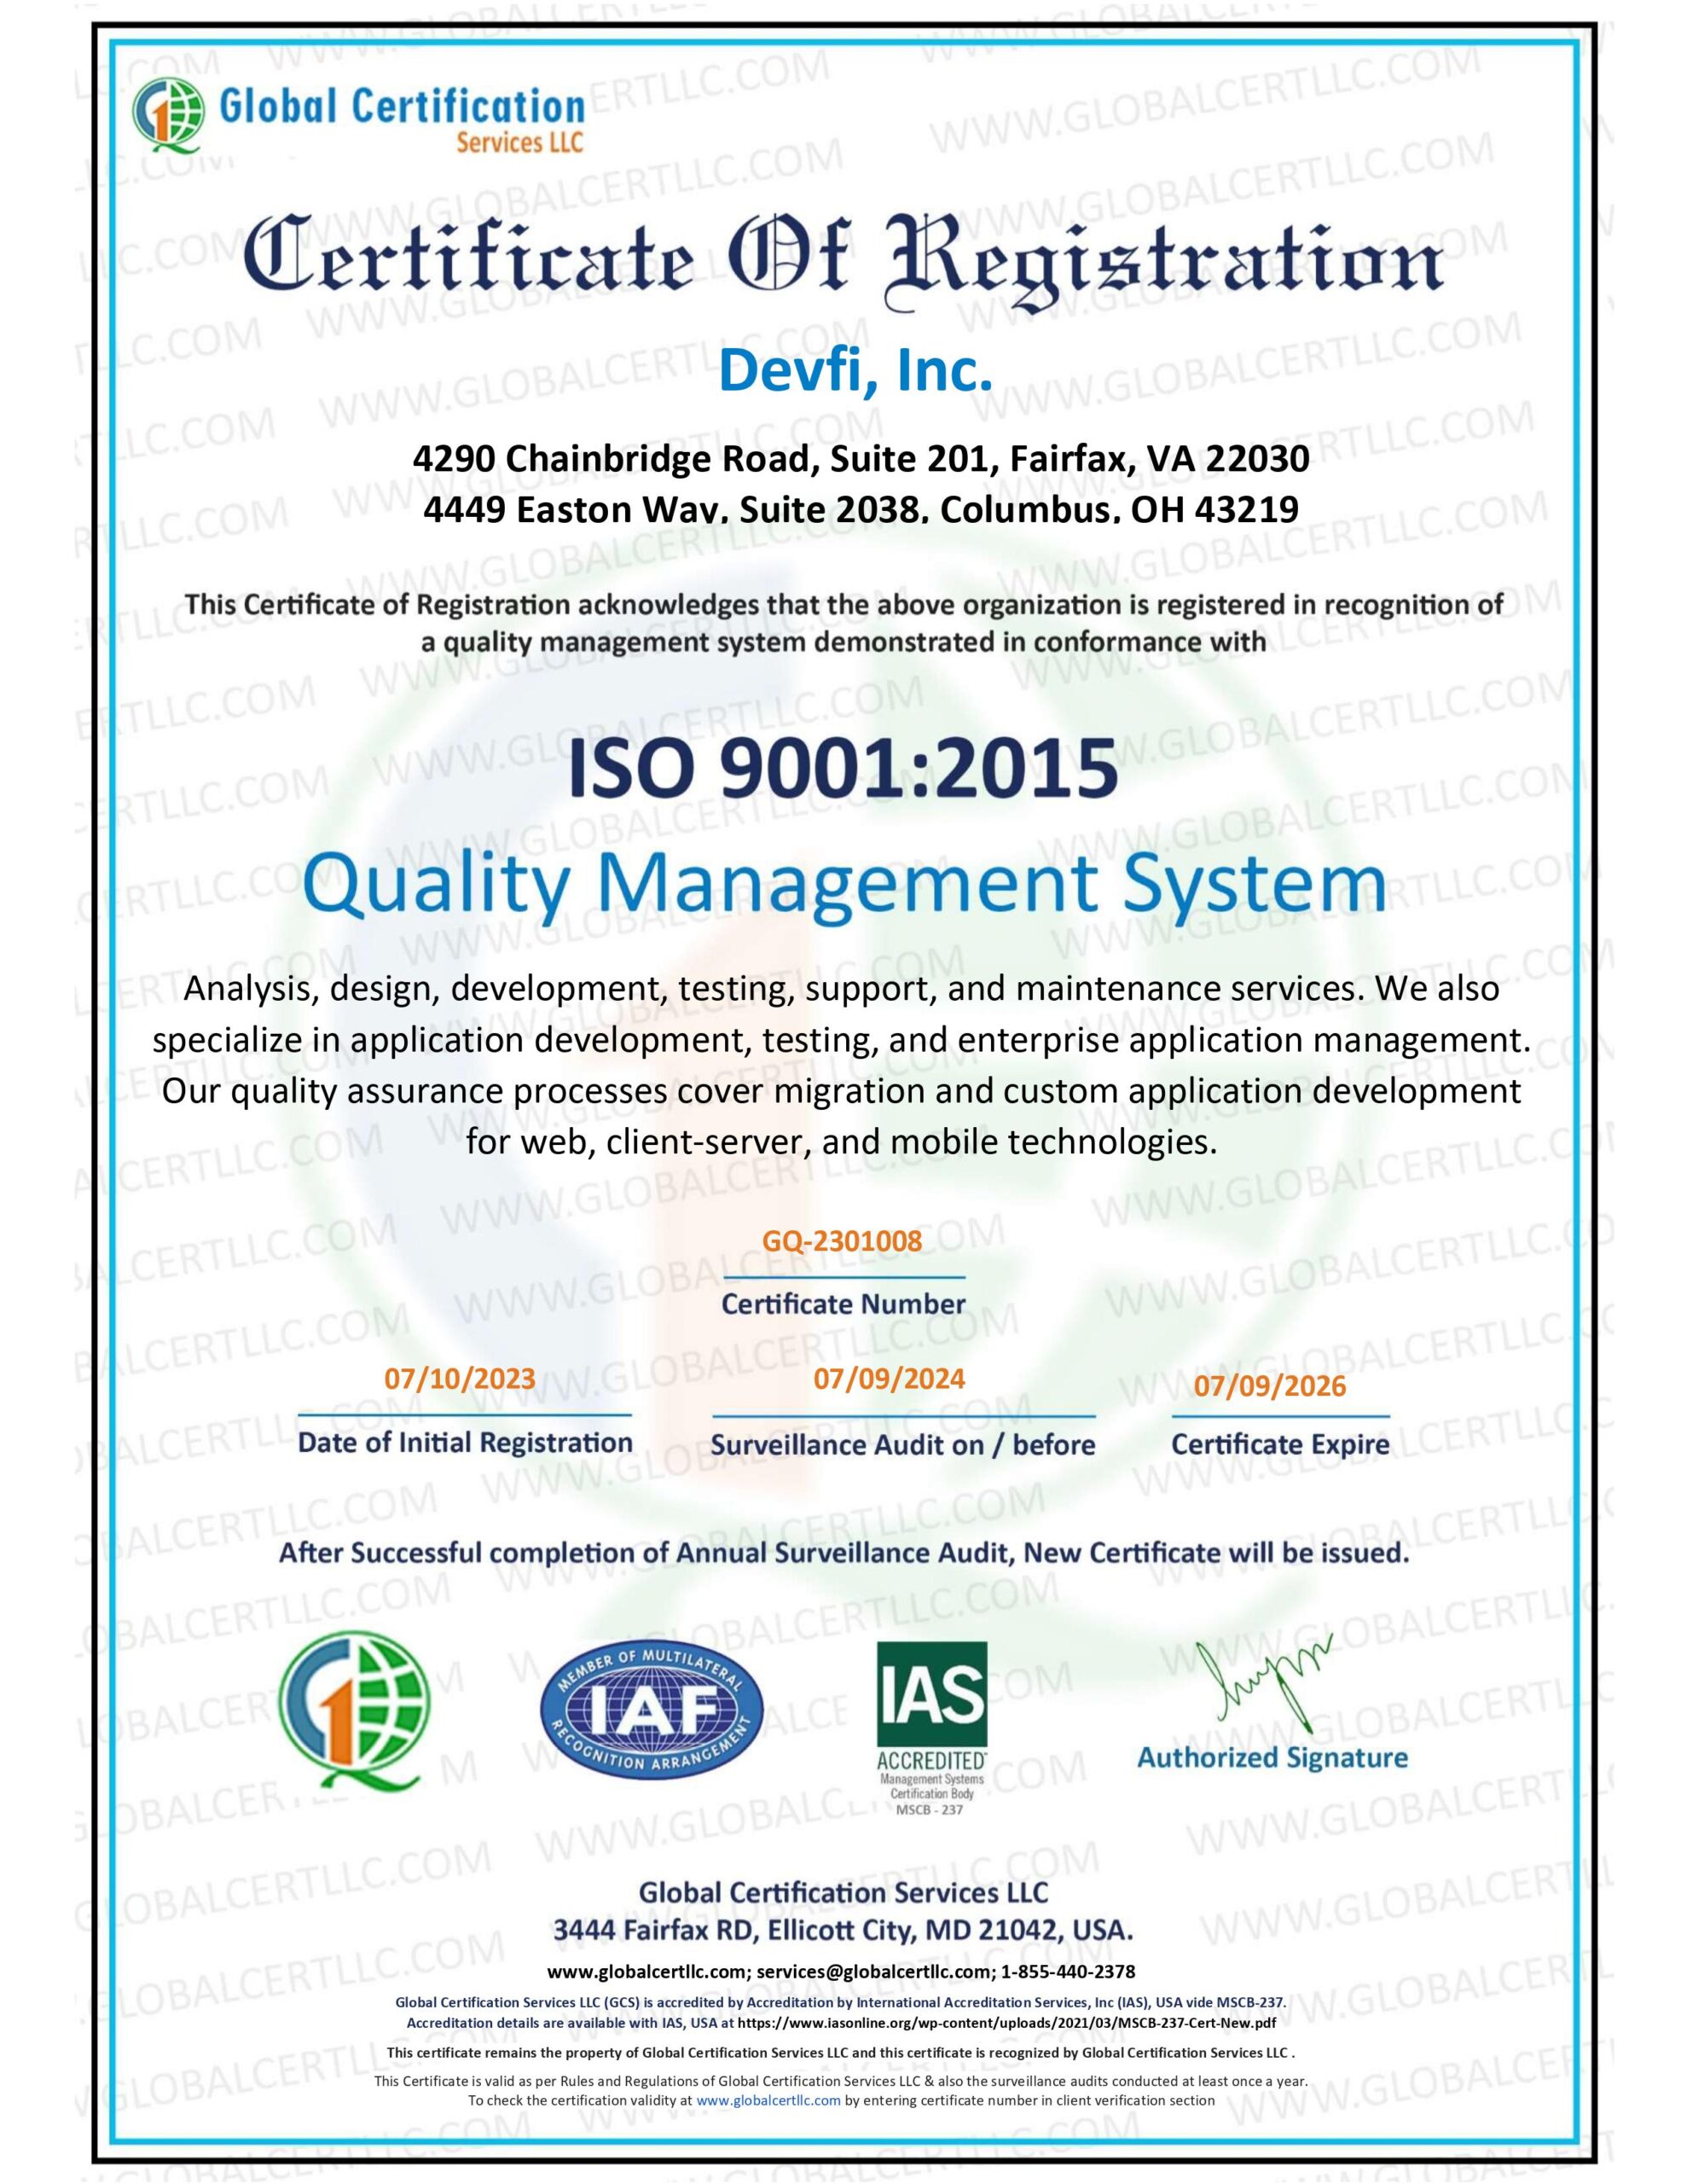 GQ-2301008 - ISO 9001 Standards Certificate